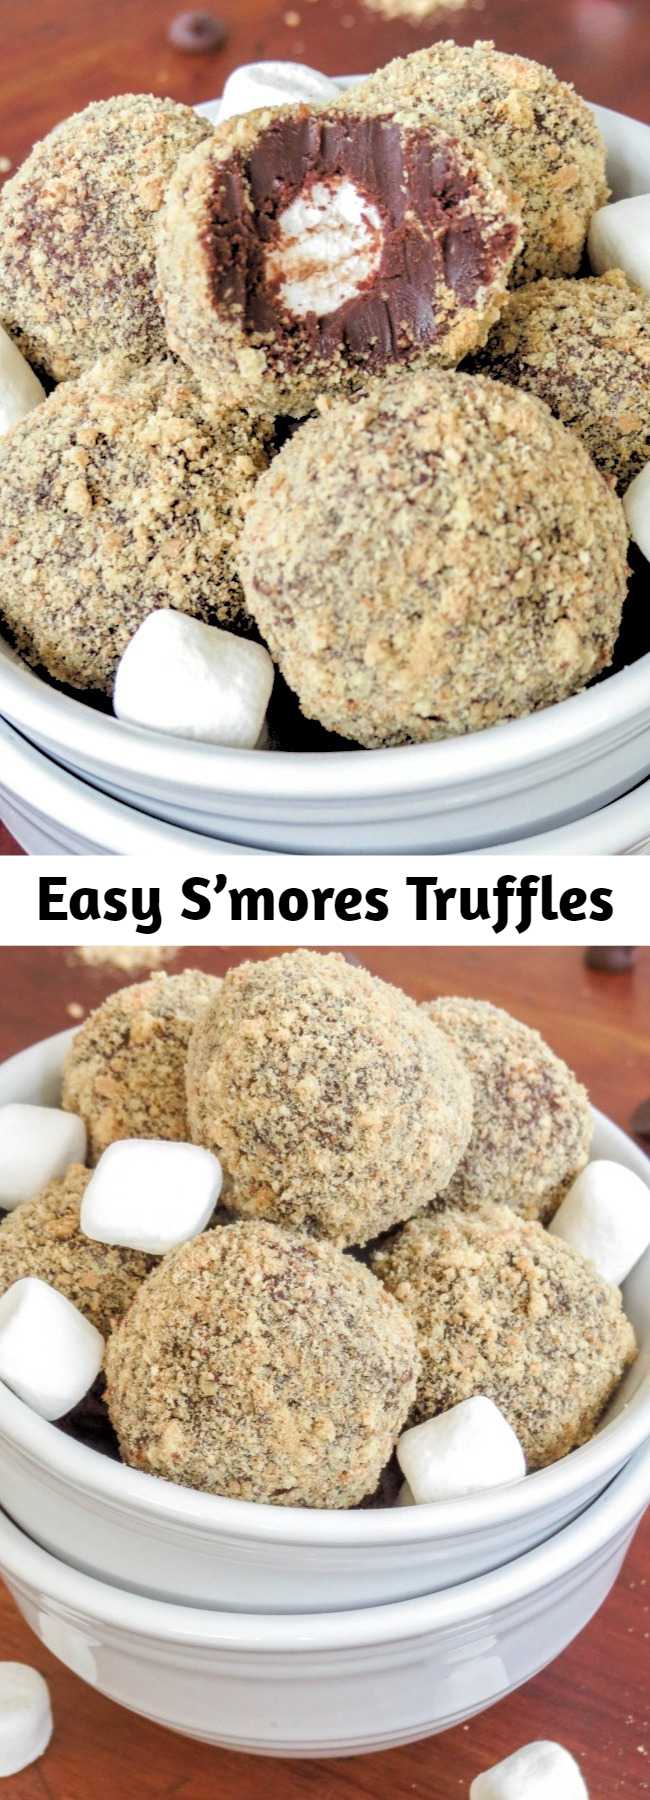 Easy S’mores Truffles Recipe - The chocolate is so creamy, exactly what you would expect from a truffle and the marshmallows stay so soft inside, they’re just perfect. I rolled them in a generous costing of graham cracker crumbs just for good measure. These are bite-sized heaven.